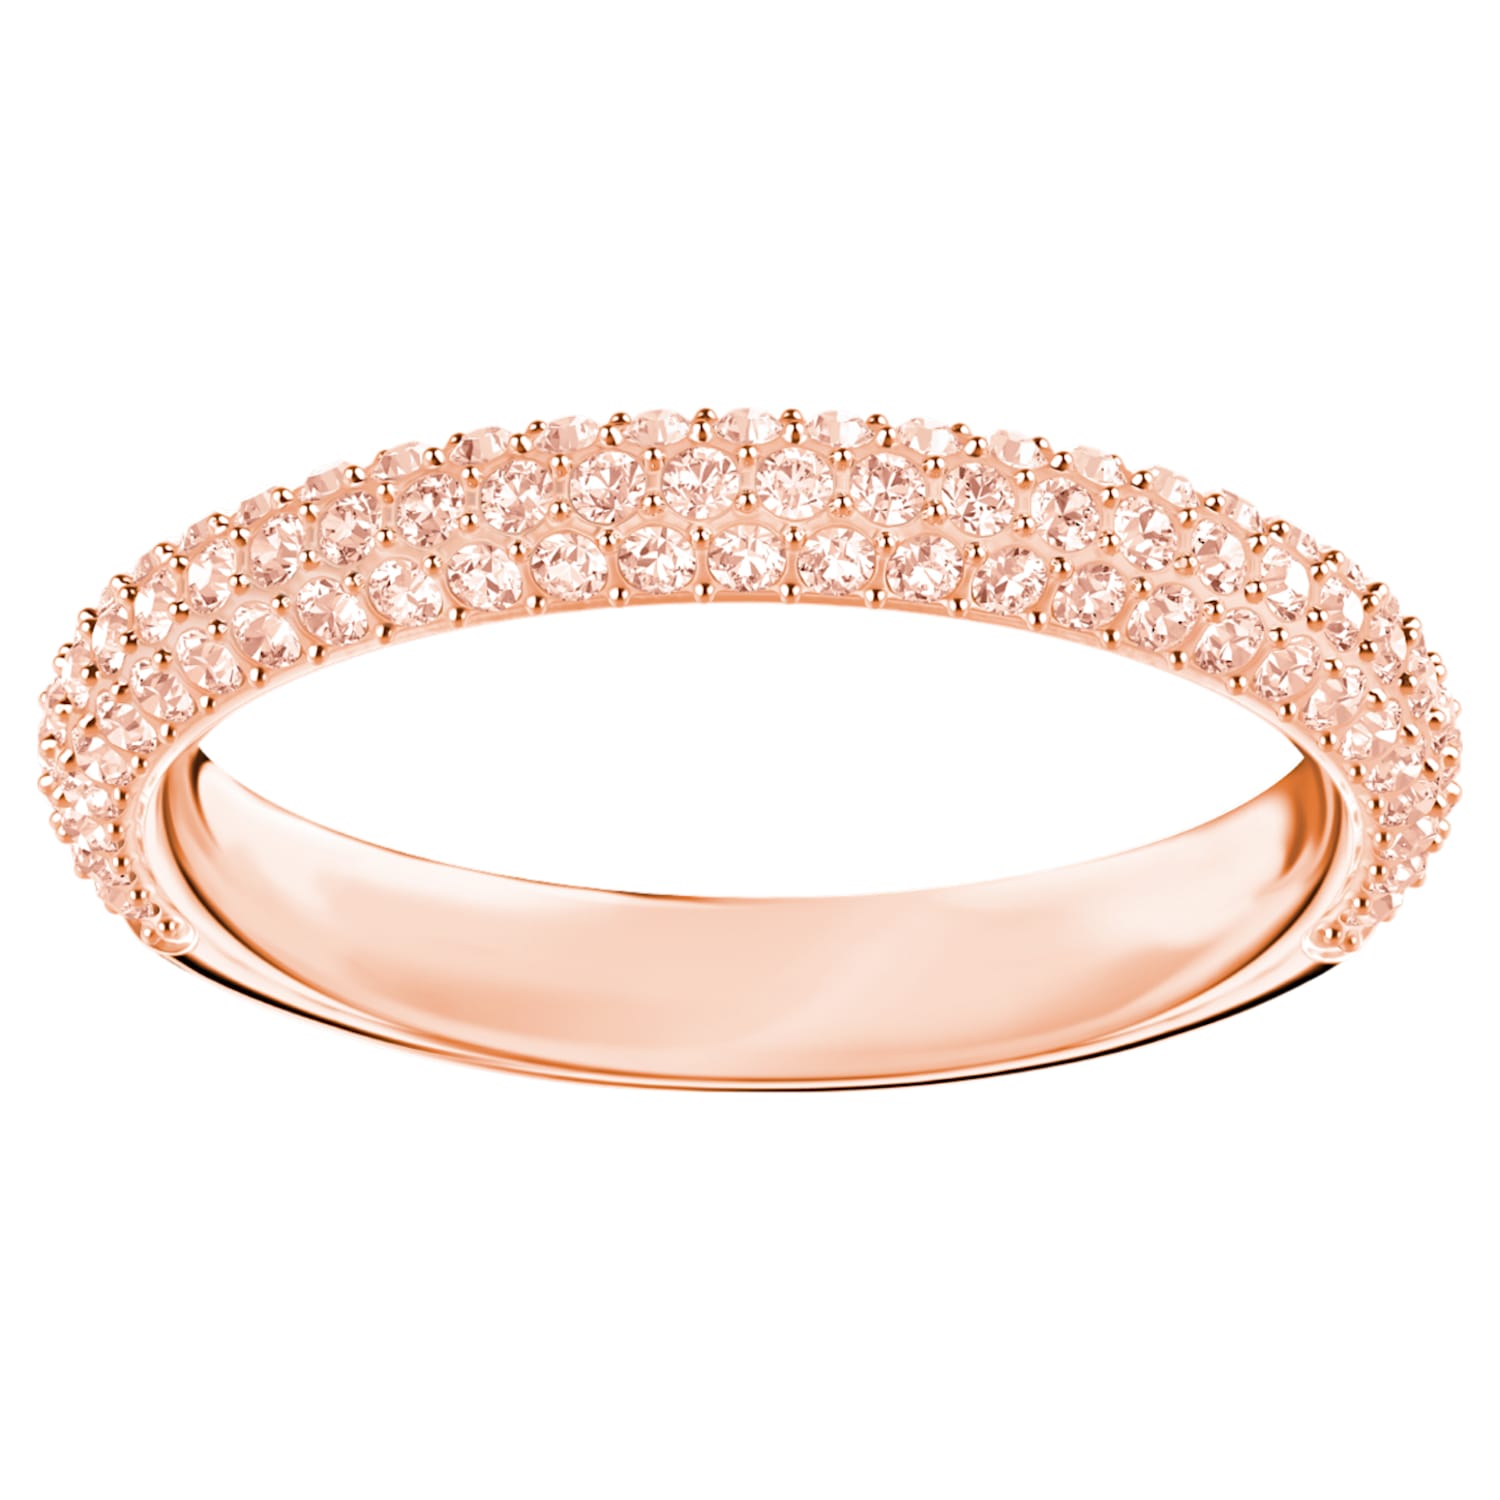 Stone ring, gold tone, Rose gold-tone plated